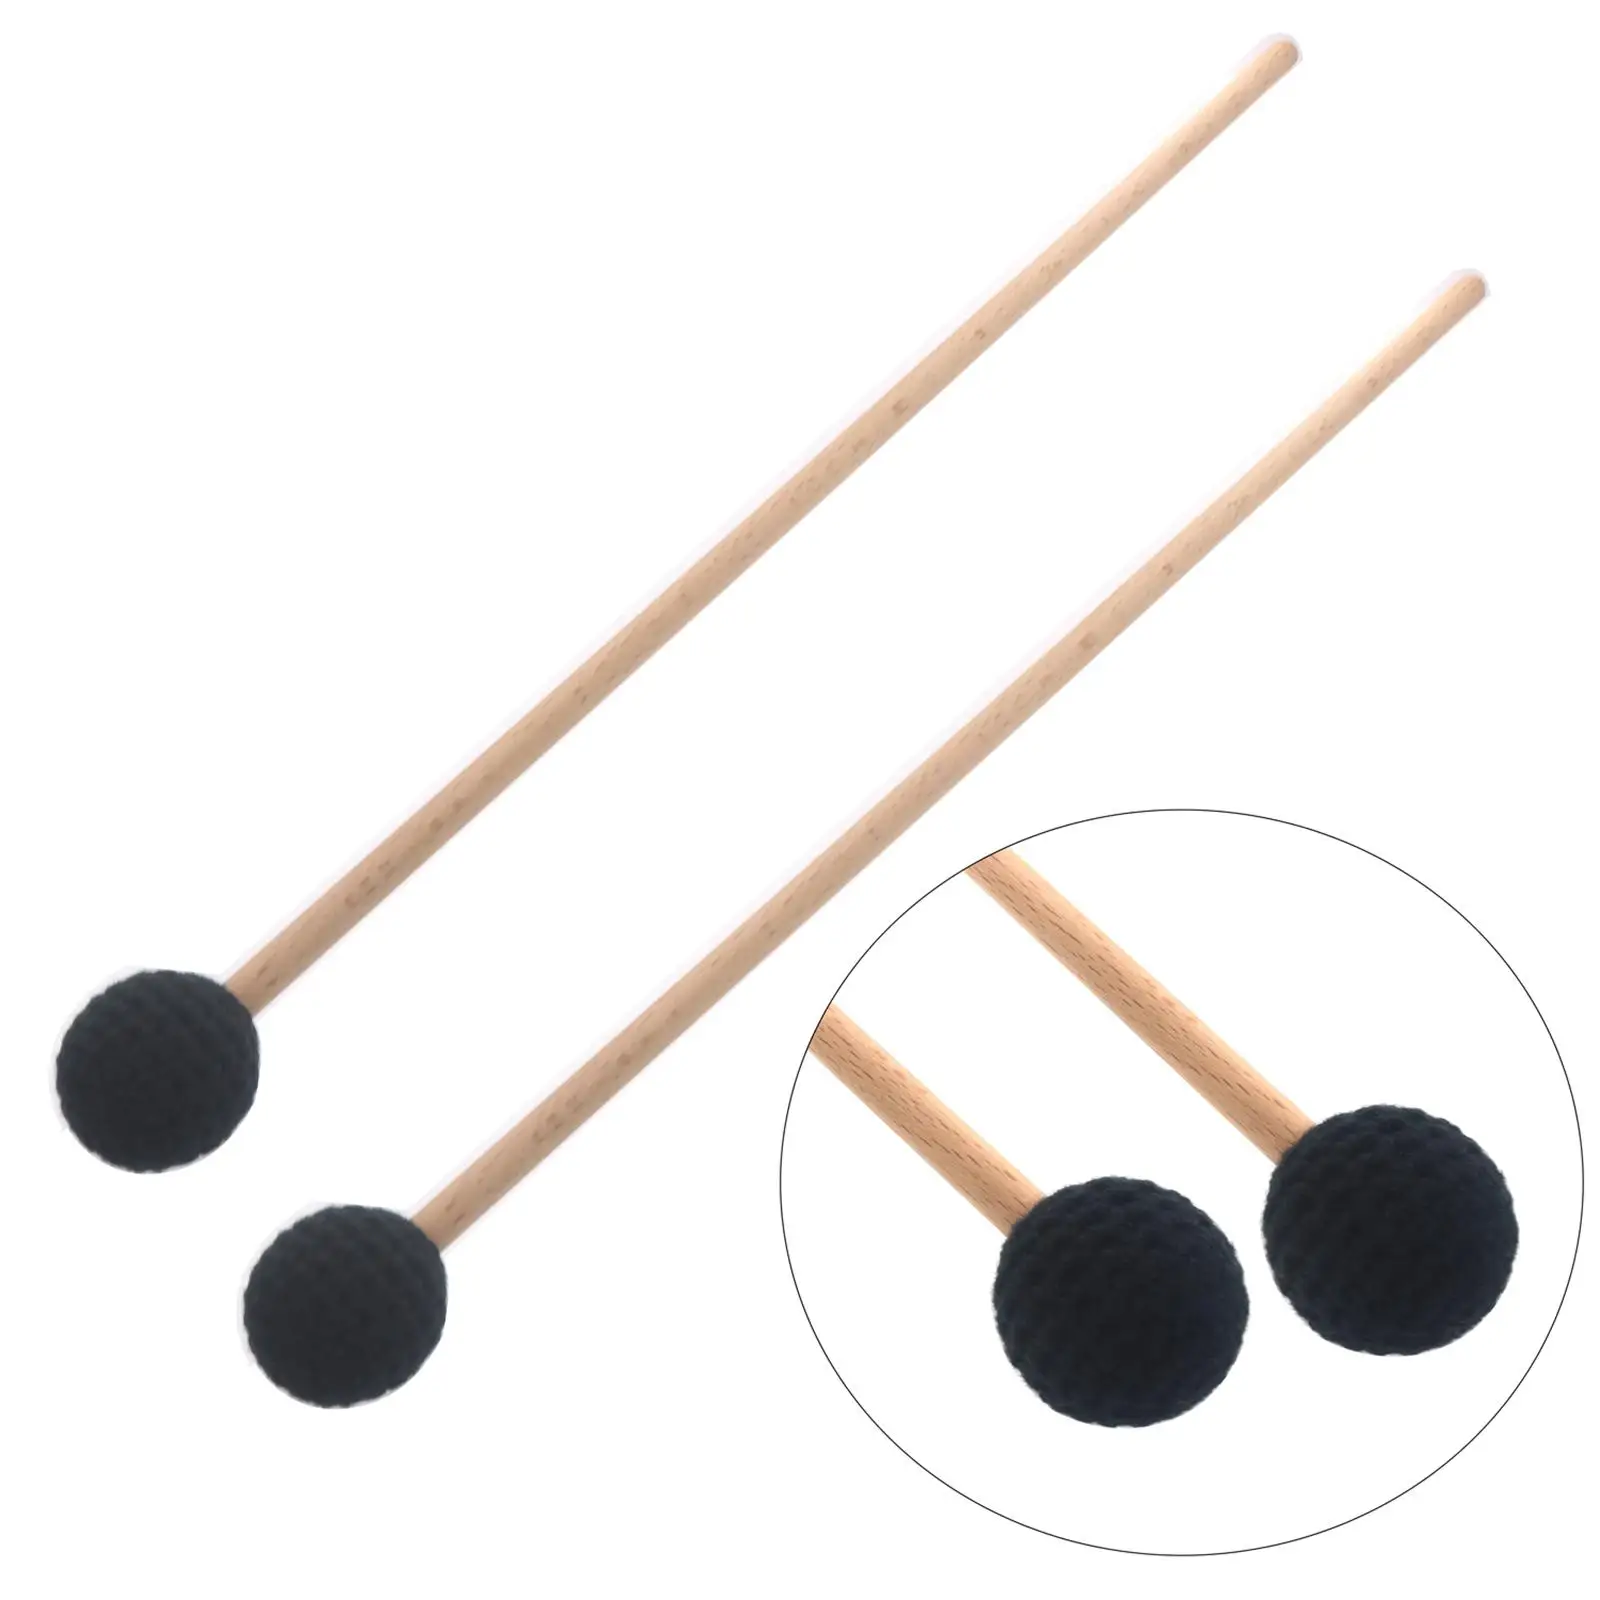 2Pcs Bell Mallets Glockenspiel Sticks, Xylophone Mallet Percussion with Wood Handle, 17 Inch Long